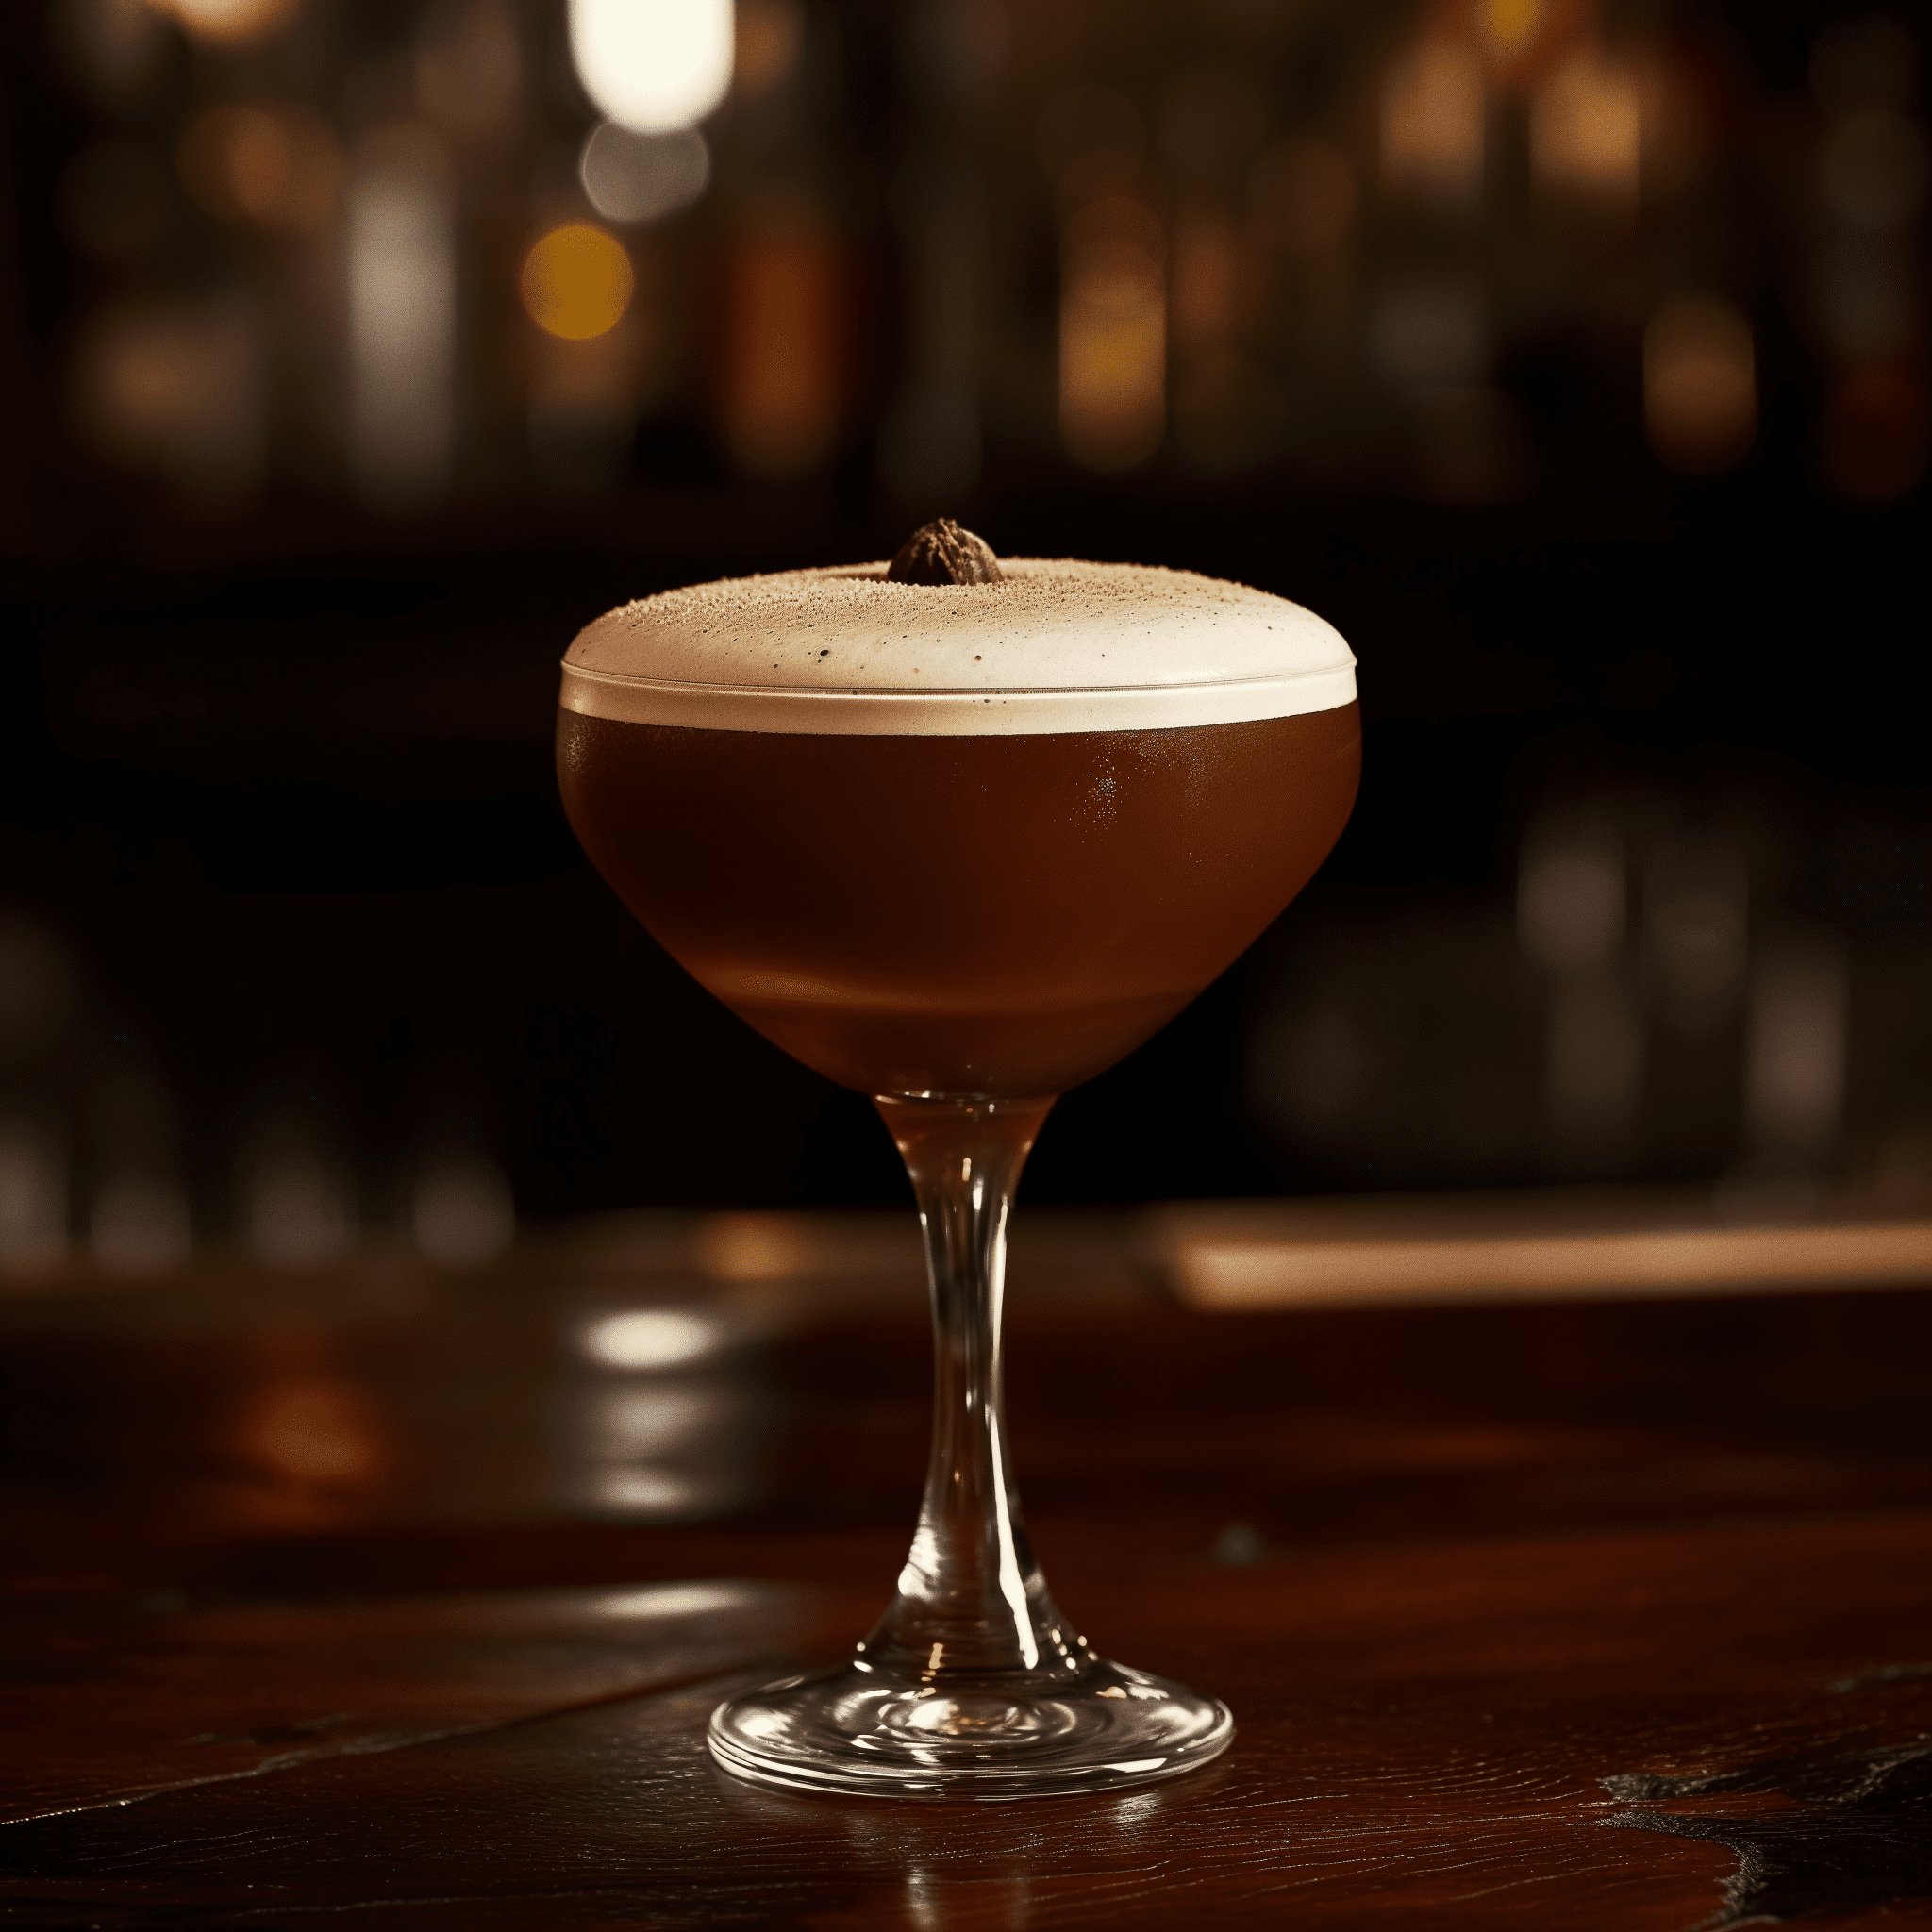 Cynar Flip Cocktail Recipe - The Cynar Flip has a complex flavor profile. It is herbaceous and slightly bitter due to the Cynar, with a rich depth from the whisky. The Cointreau and clove syrup balance the bitterness with sweetness and spice, while the whole egg gives it a creamy, luxurious texture.